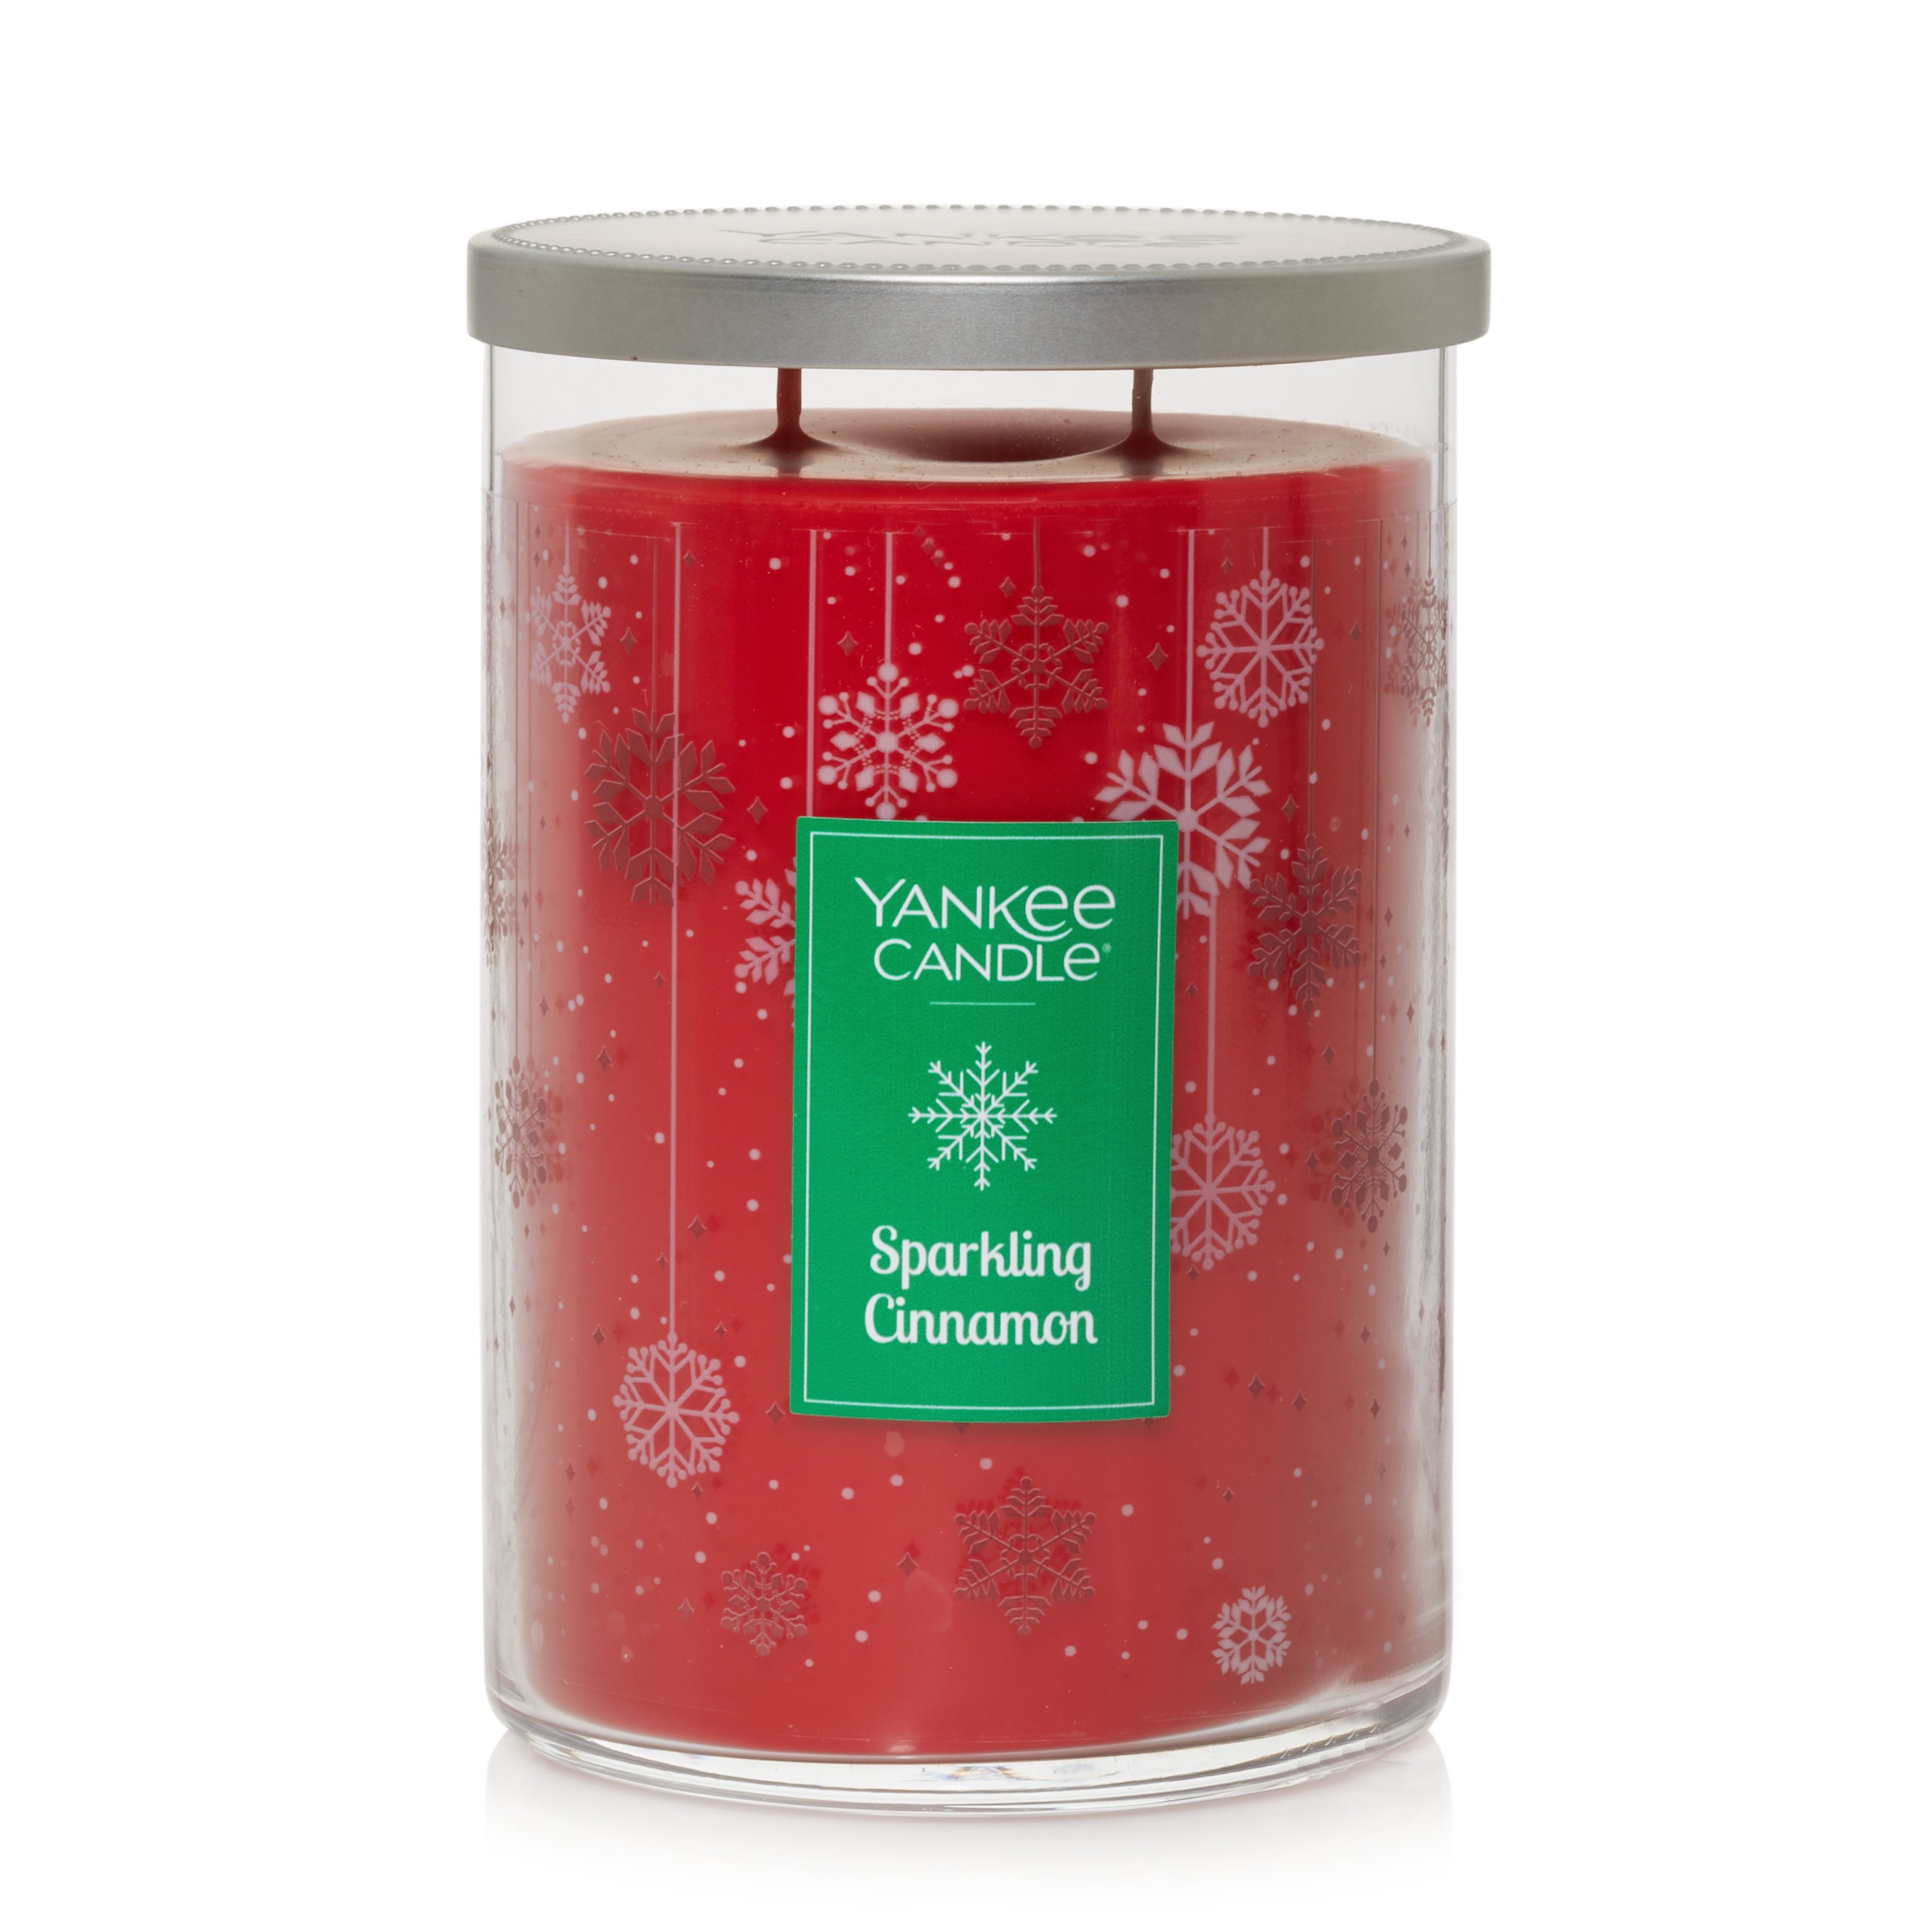 Yankee Candle Candle, Sparkling Cinnamon - 1 candle, 22 oz